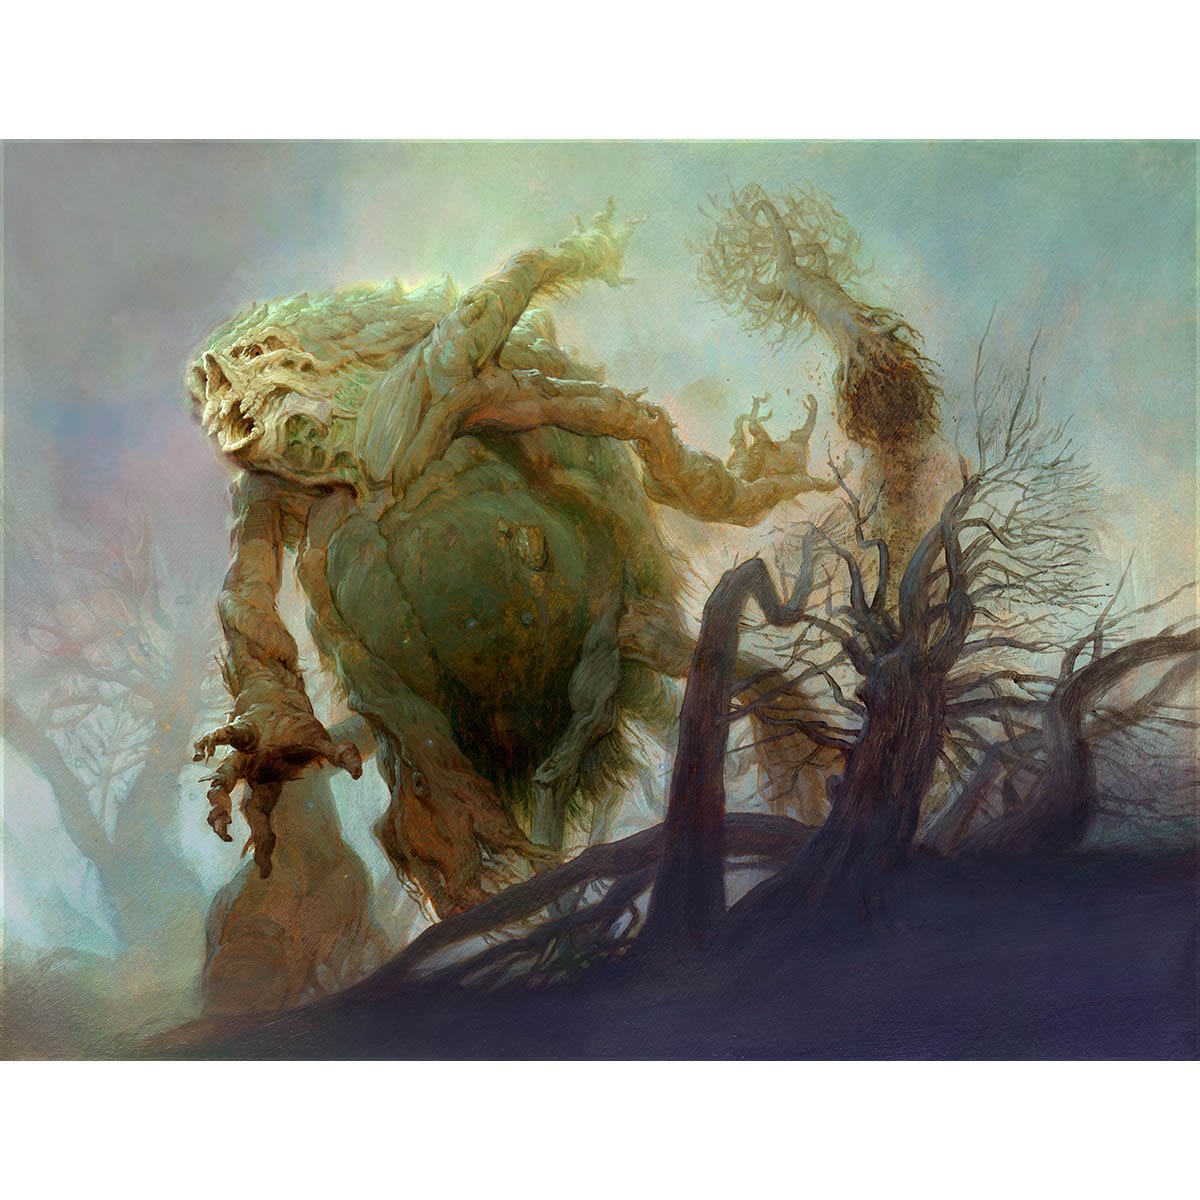 Woodfall Primus Print - Print - Original Magic Art - Accessories for Magic the Gathering and other card games